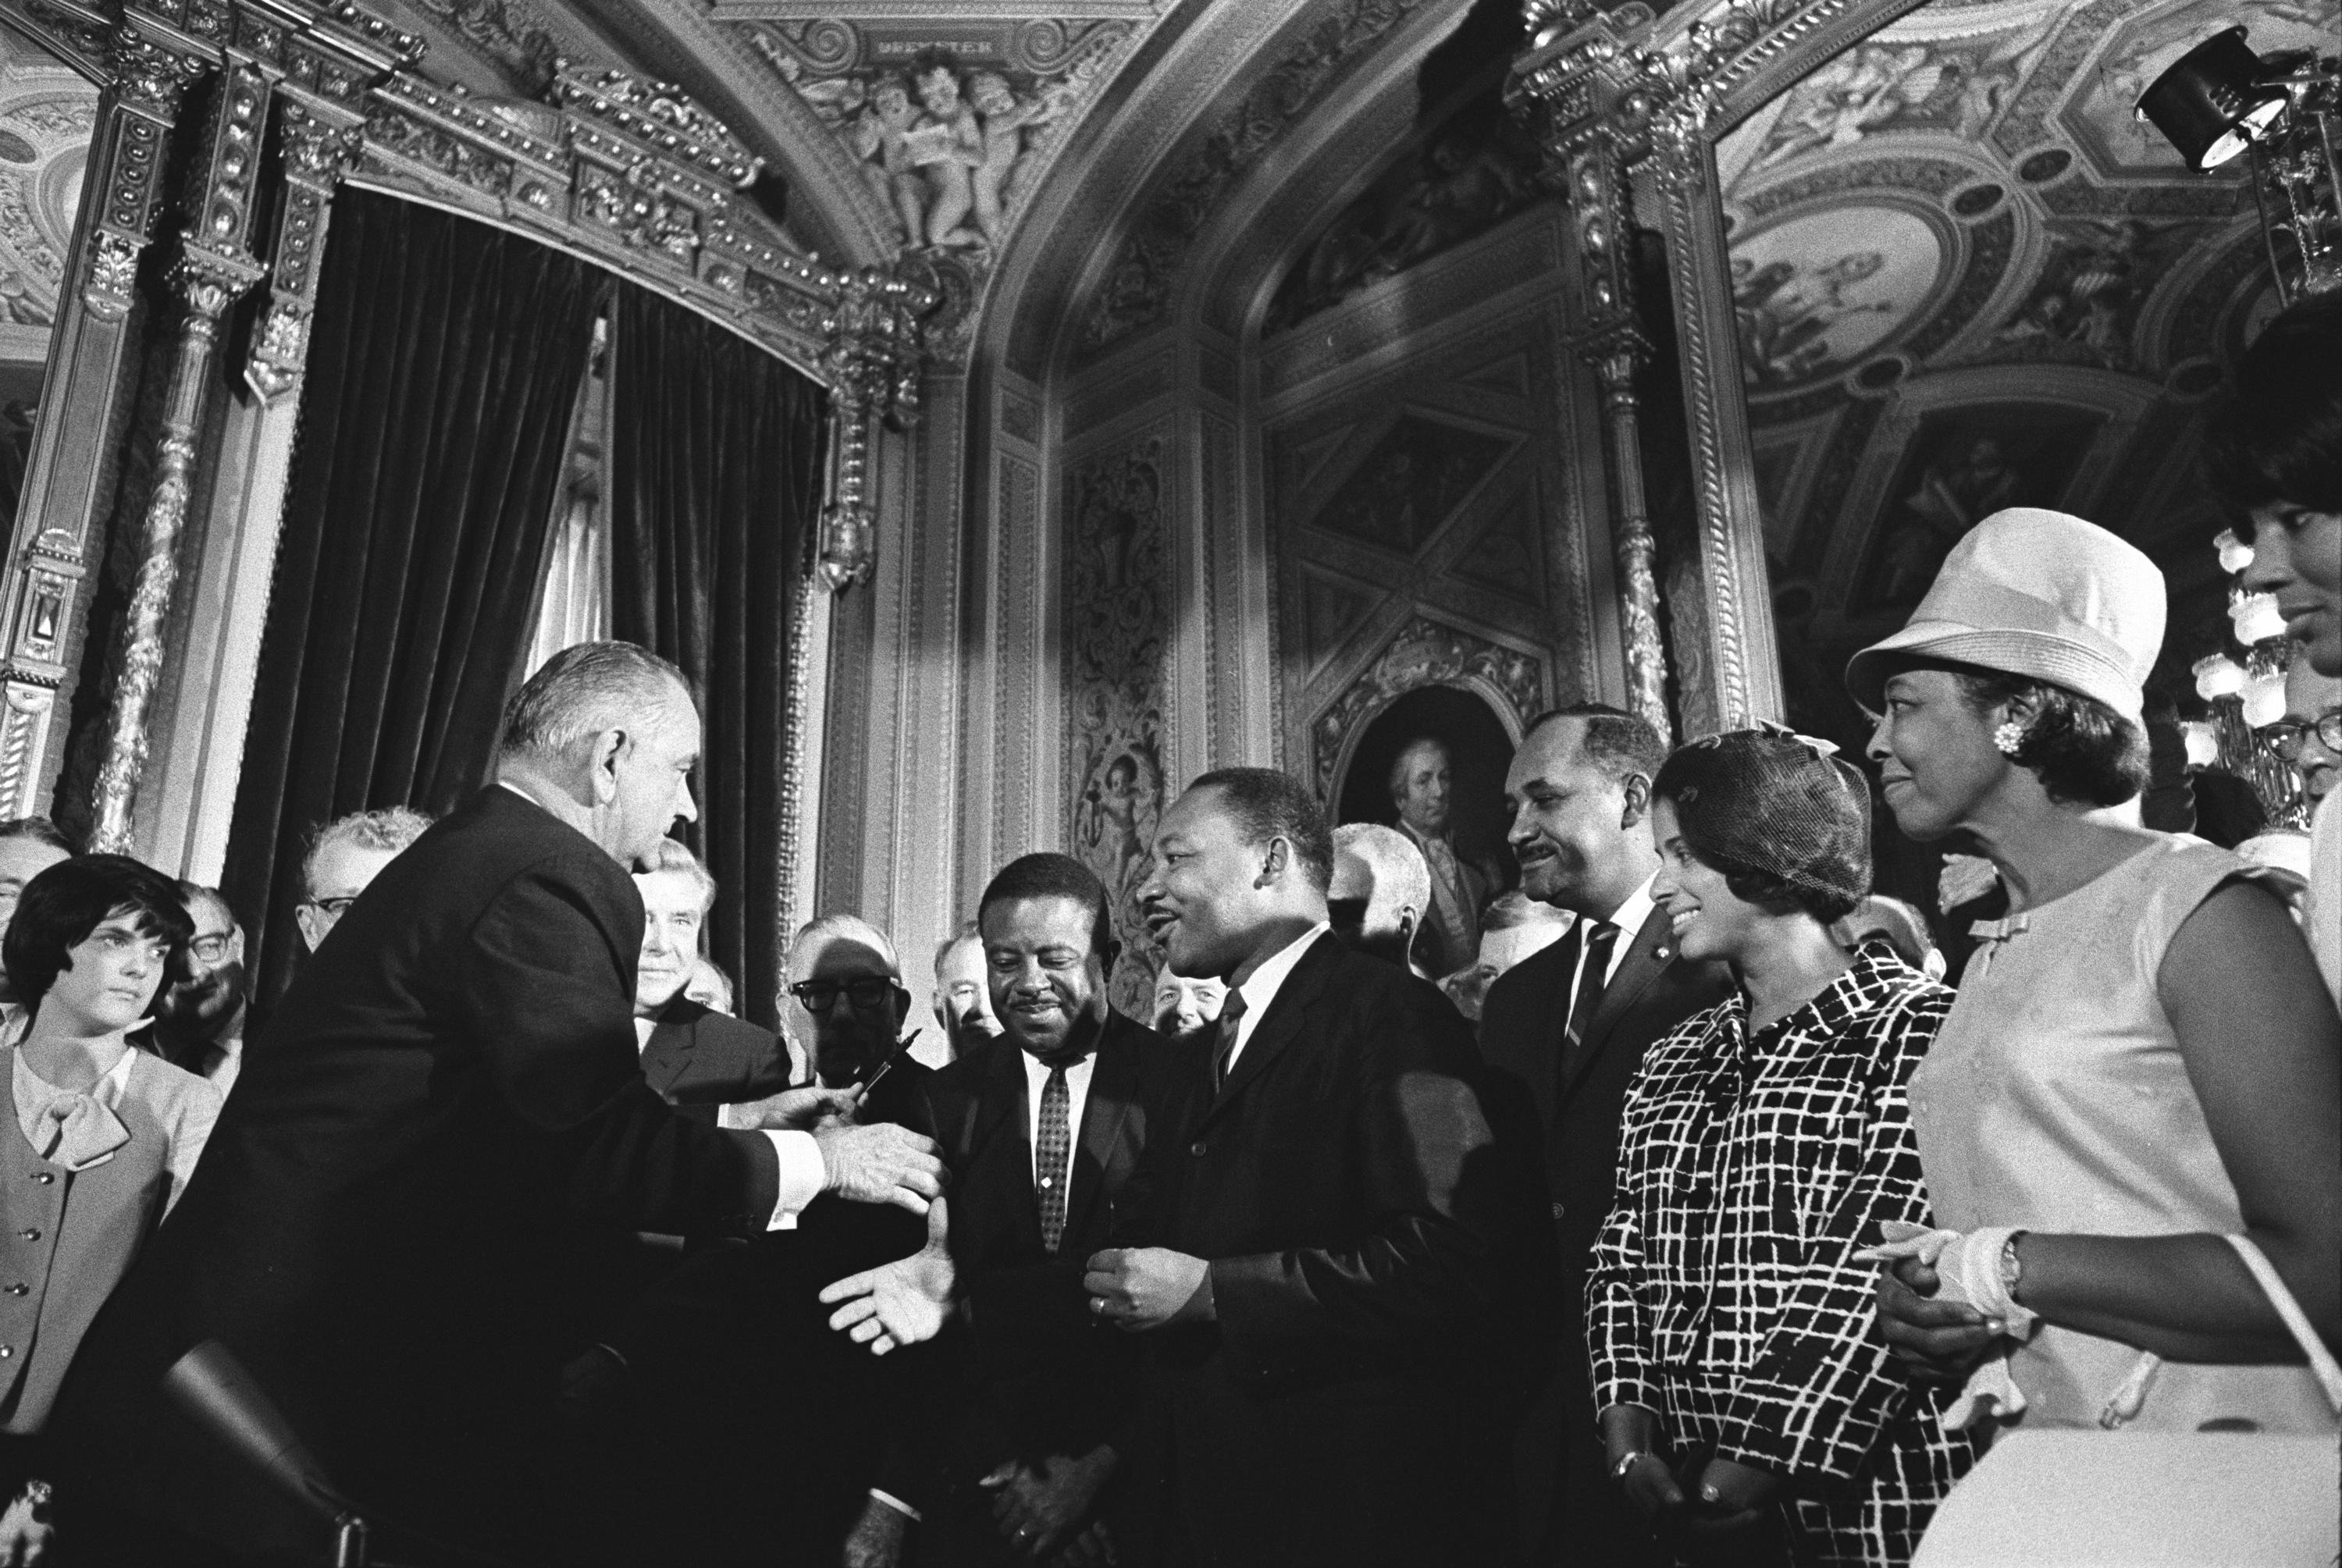 Black and white photograph of Lyndon Johnson extending a hand to Martin Luther King Jr. They are surrounded by a crowd of onlookers, both black and white.